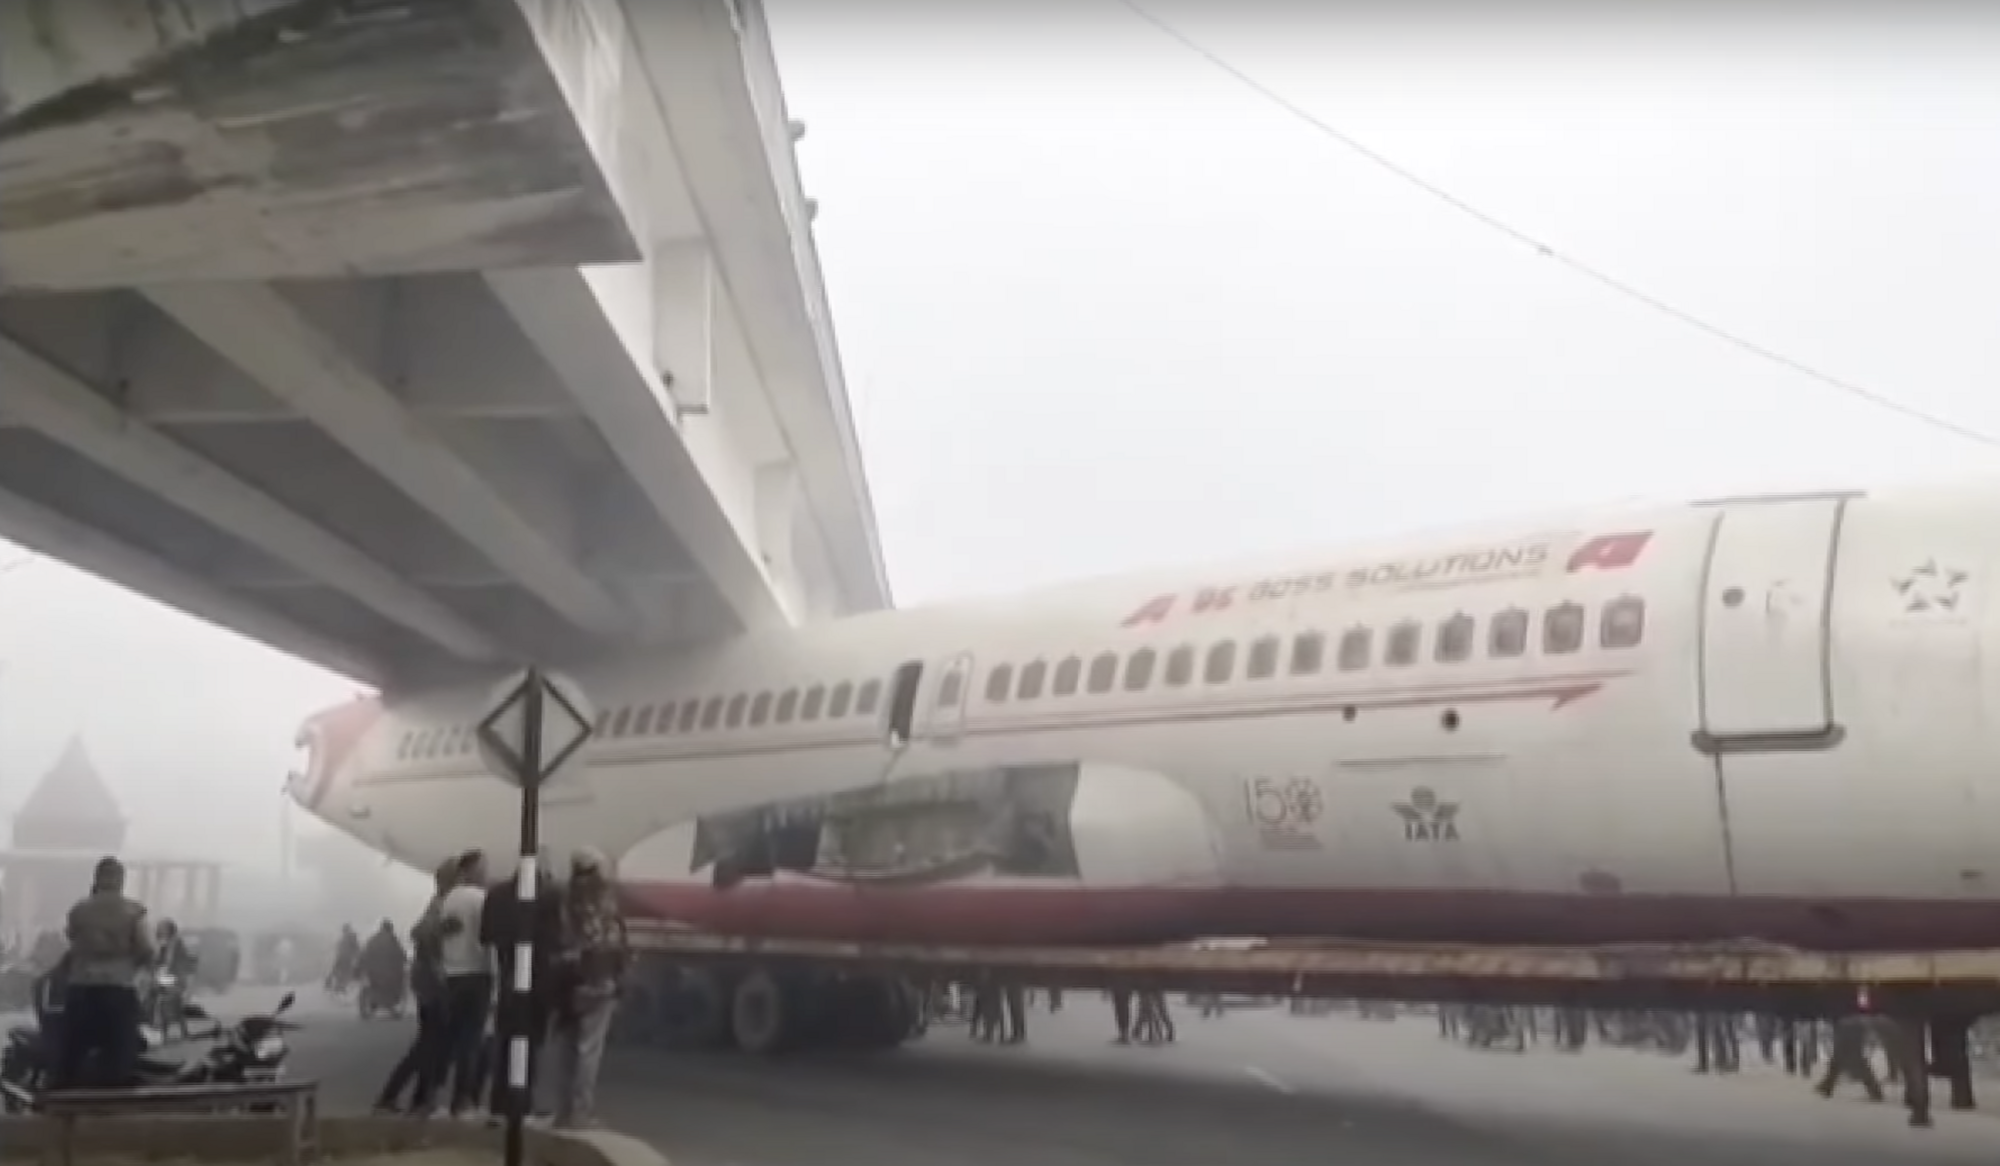 An Air India-branded plane gets stuck under a bridge, but the company has nothing to do with it. Video.